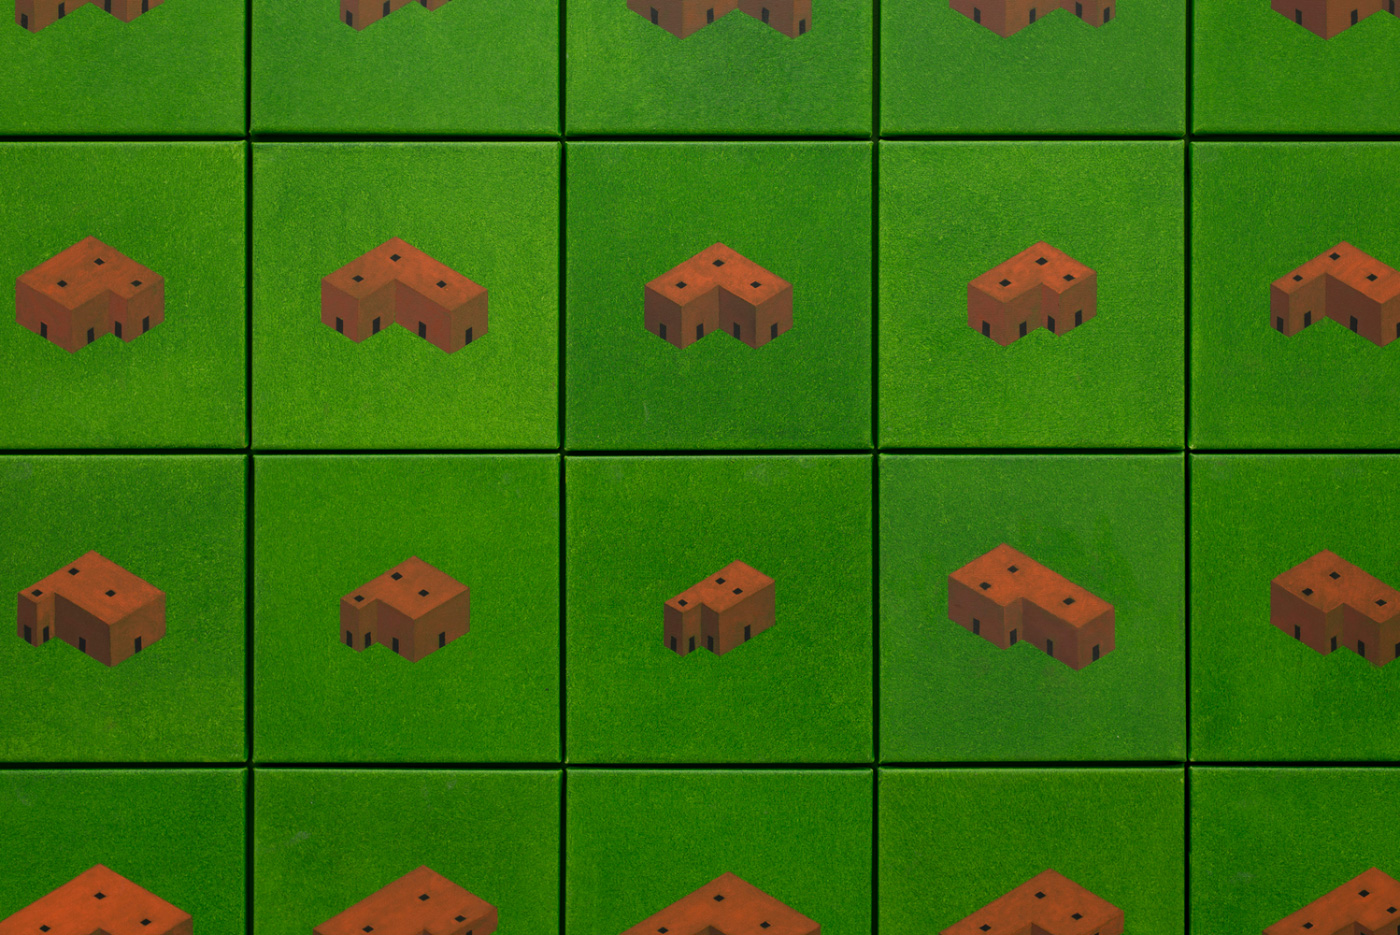 Diagram of repeating buildings on green squares, from Pezo von Ellrichshausen